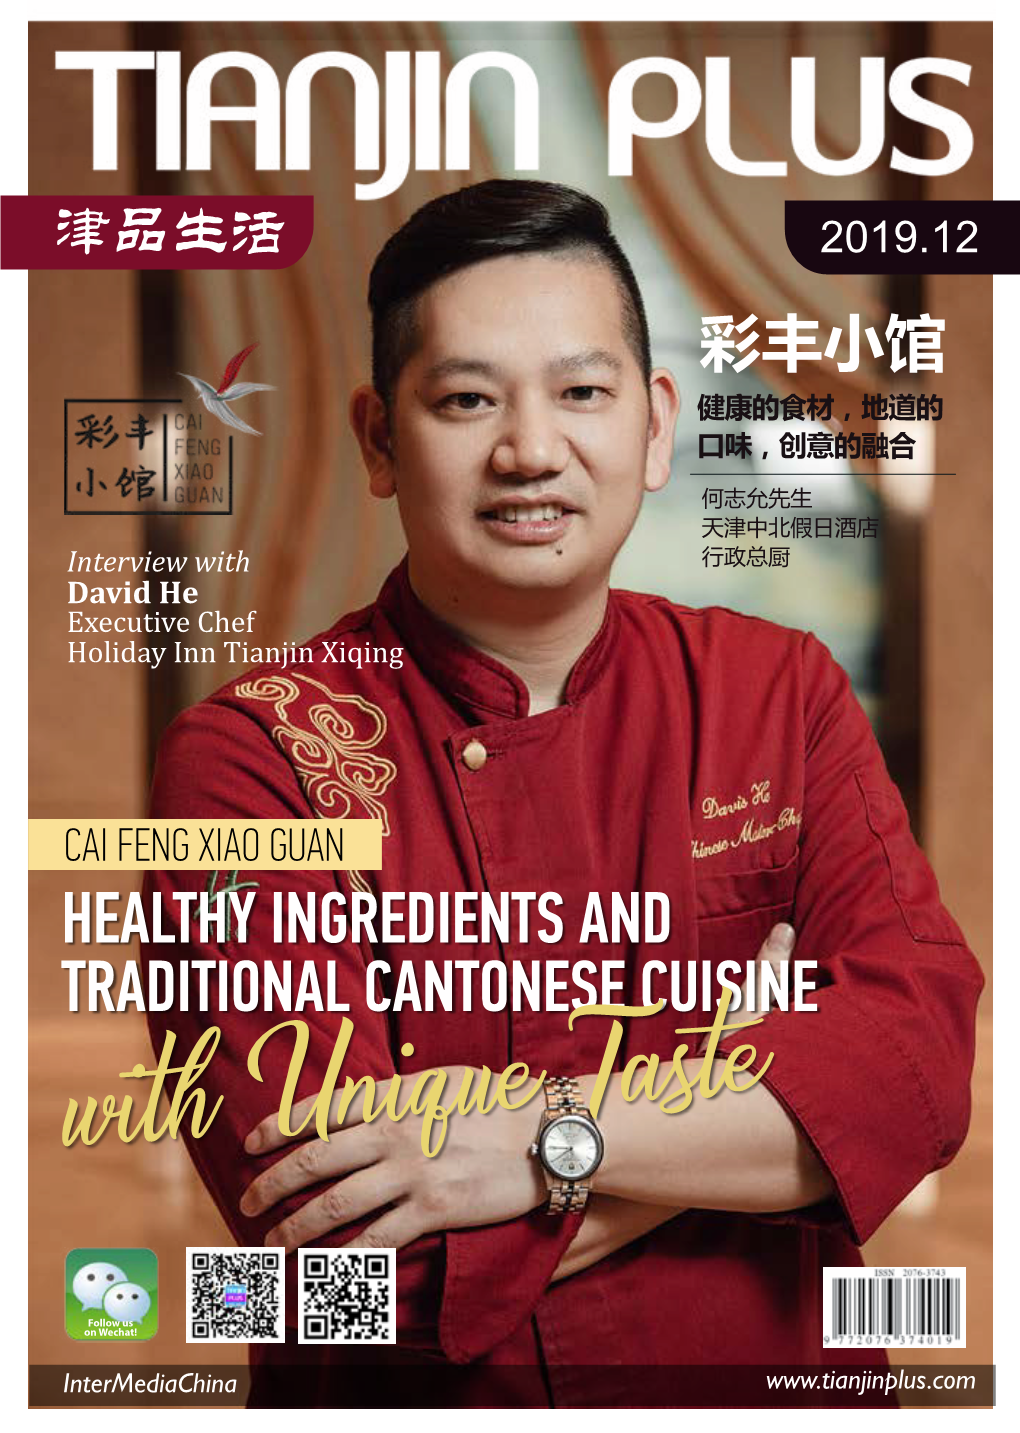 Healthy Ingredients and Traditional Cantonese Cuisine with Unique Taste